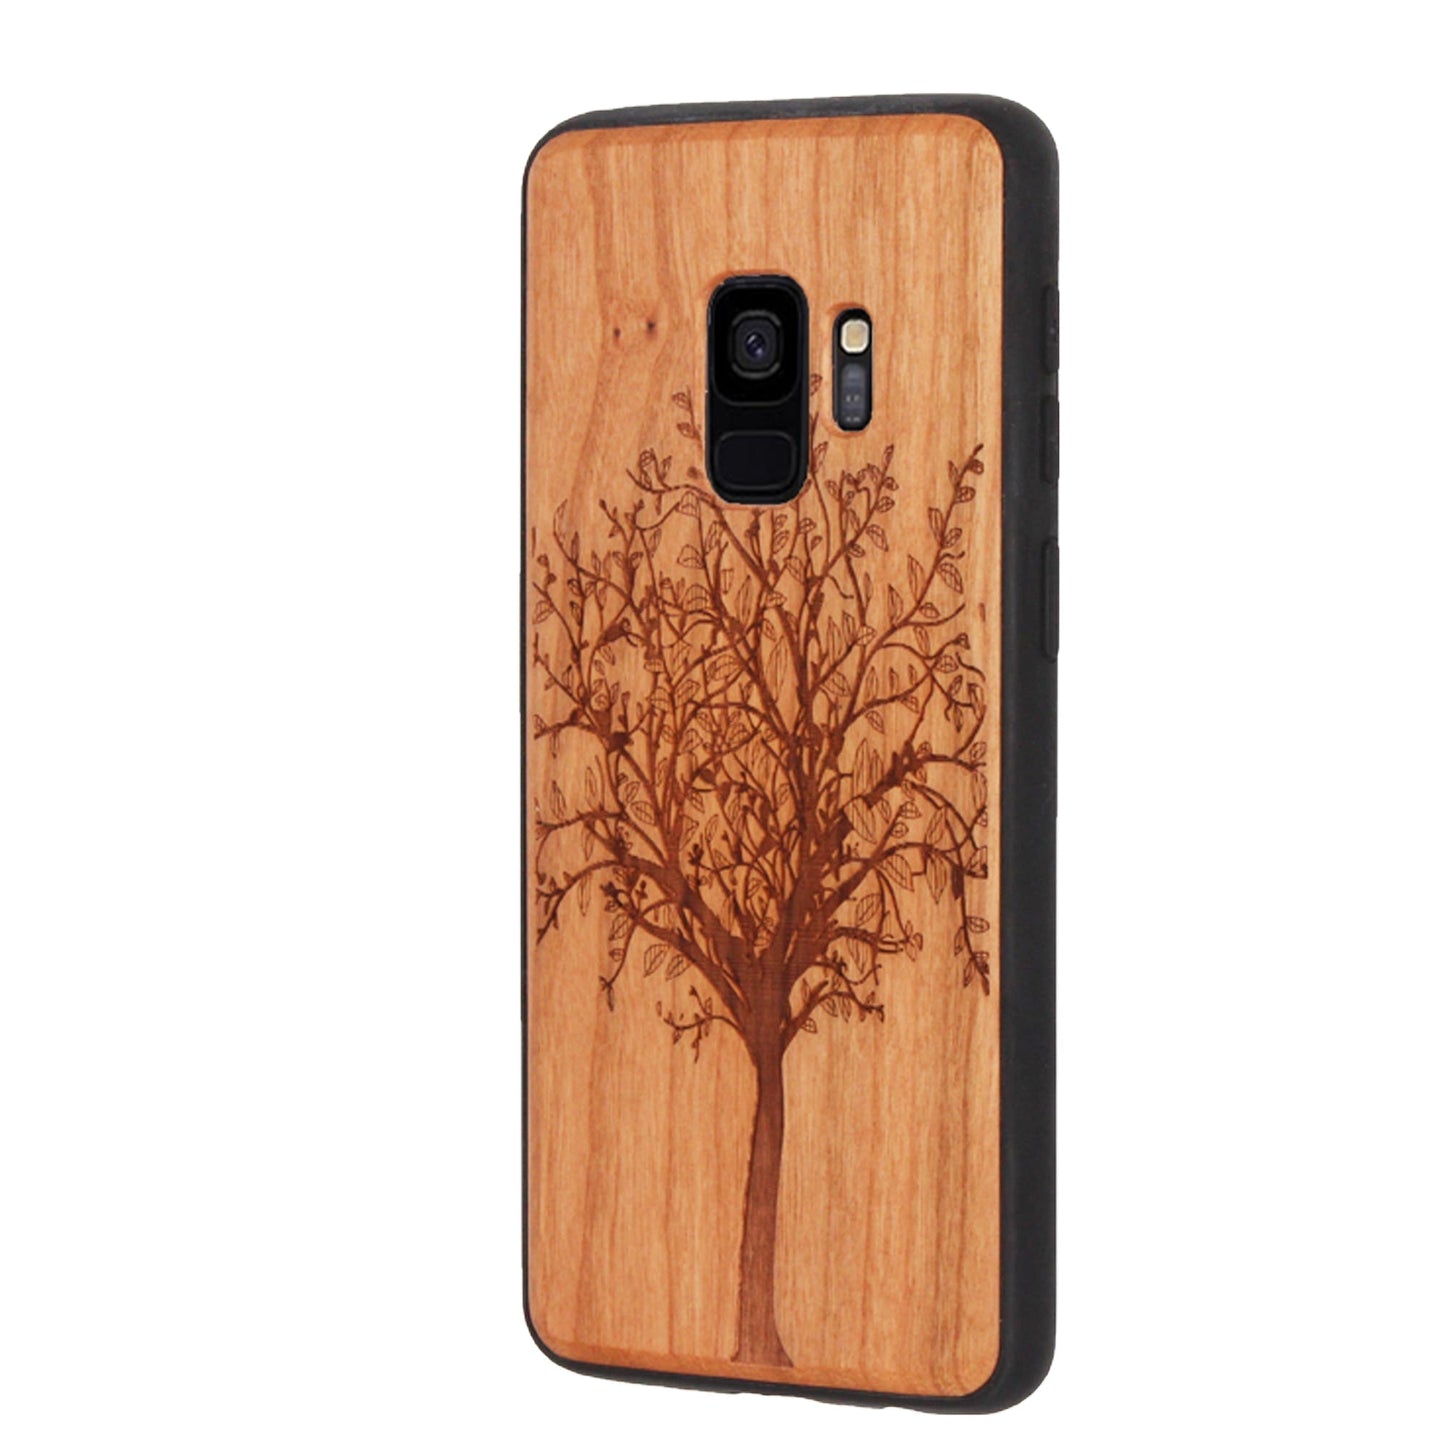 Tree of life Eden case made of cherry wood for Samsung Galaxy S9